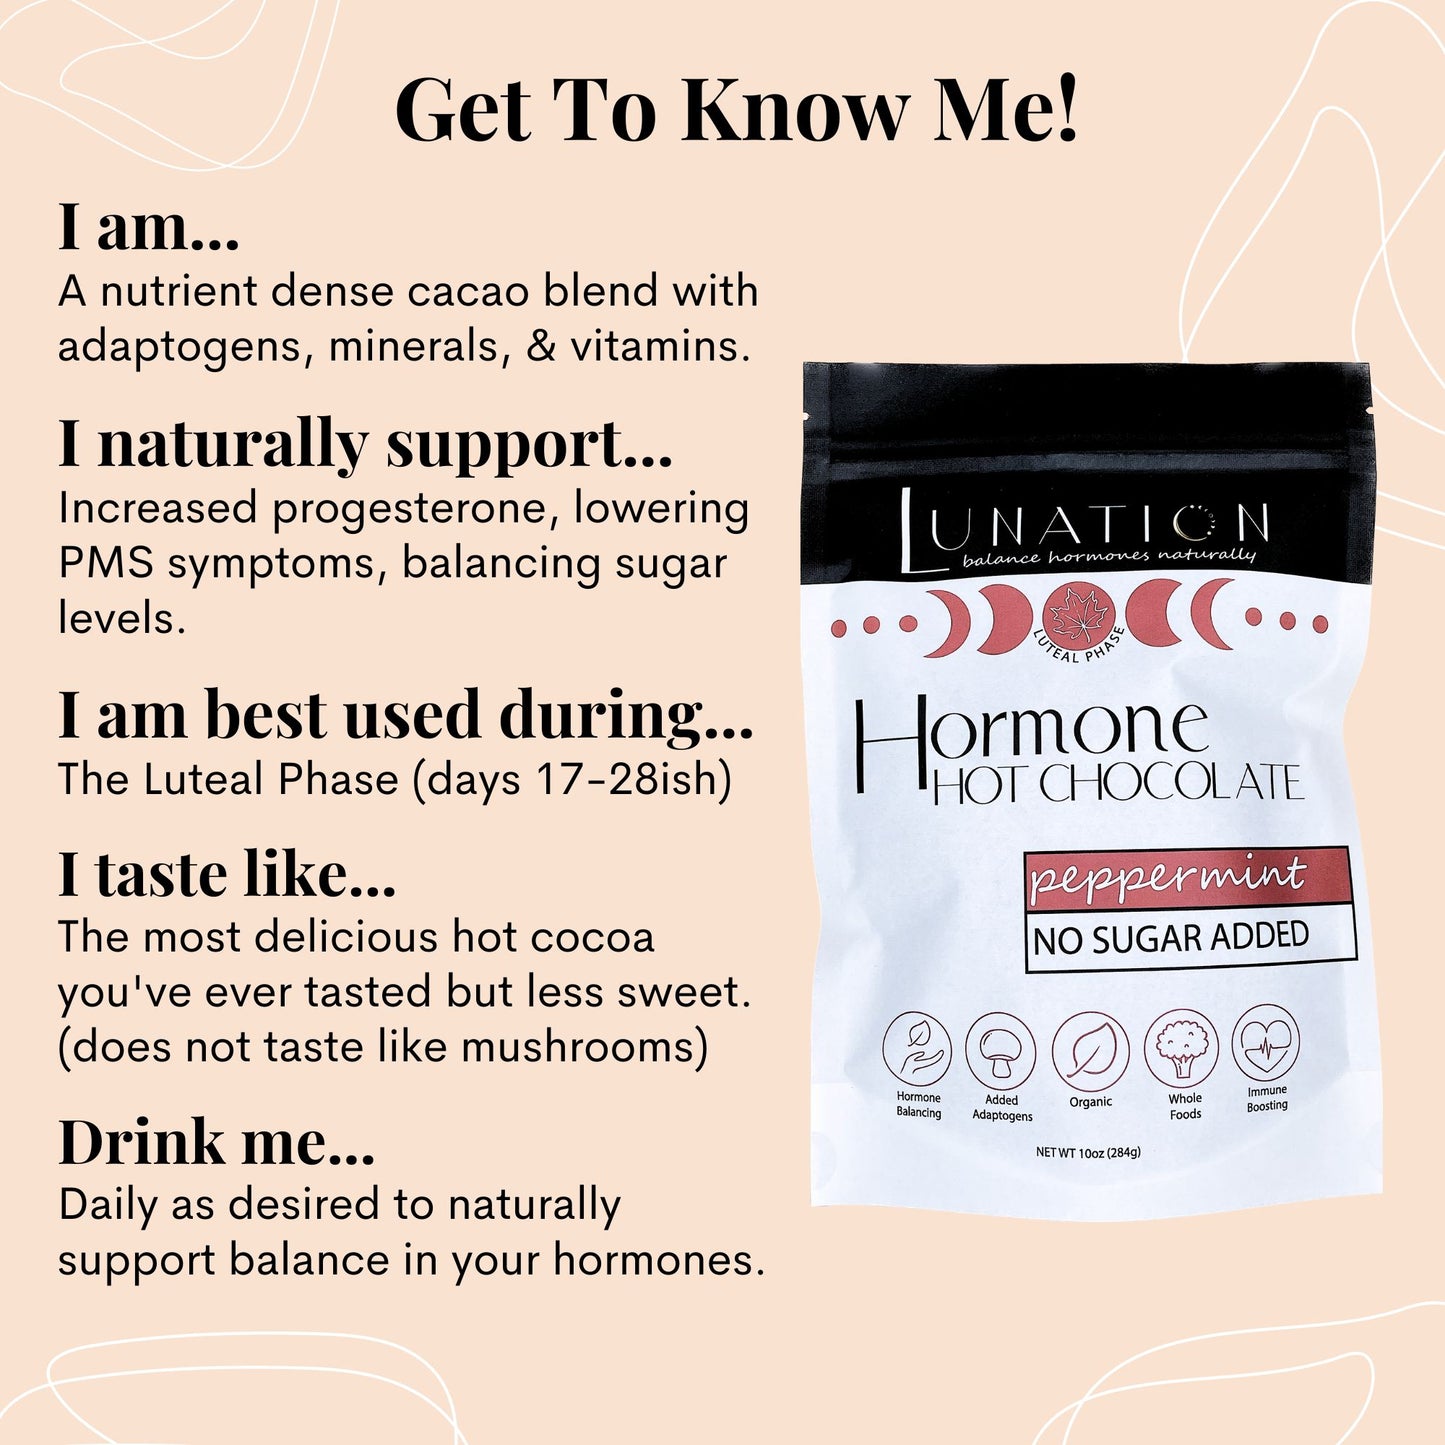 Peppermint | Luteal Phase 4 | Hormone Hot Chocolate